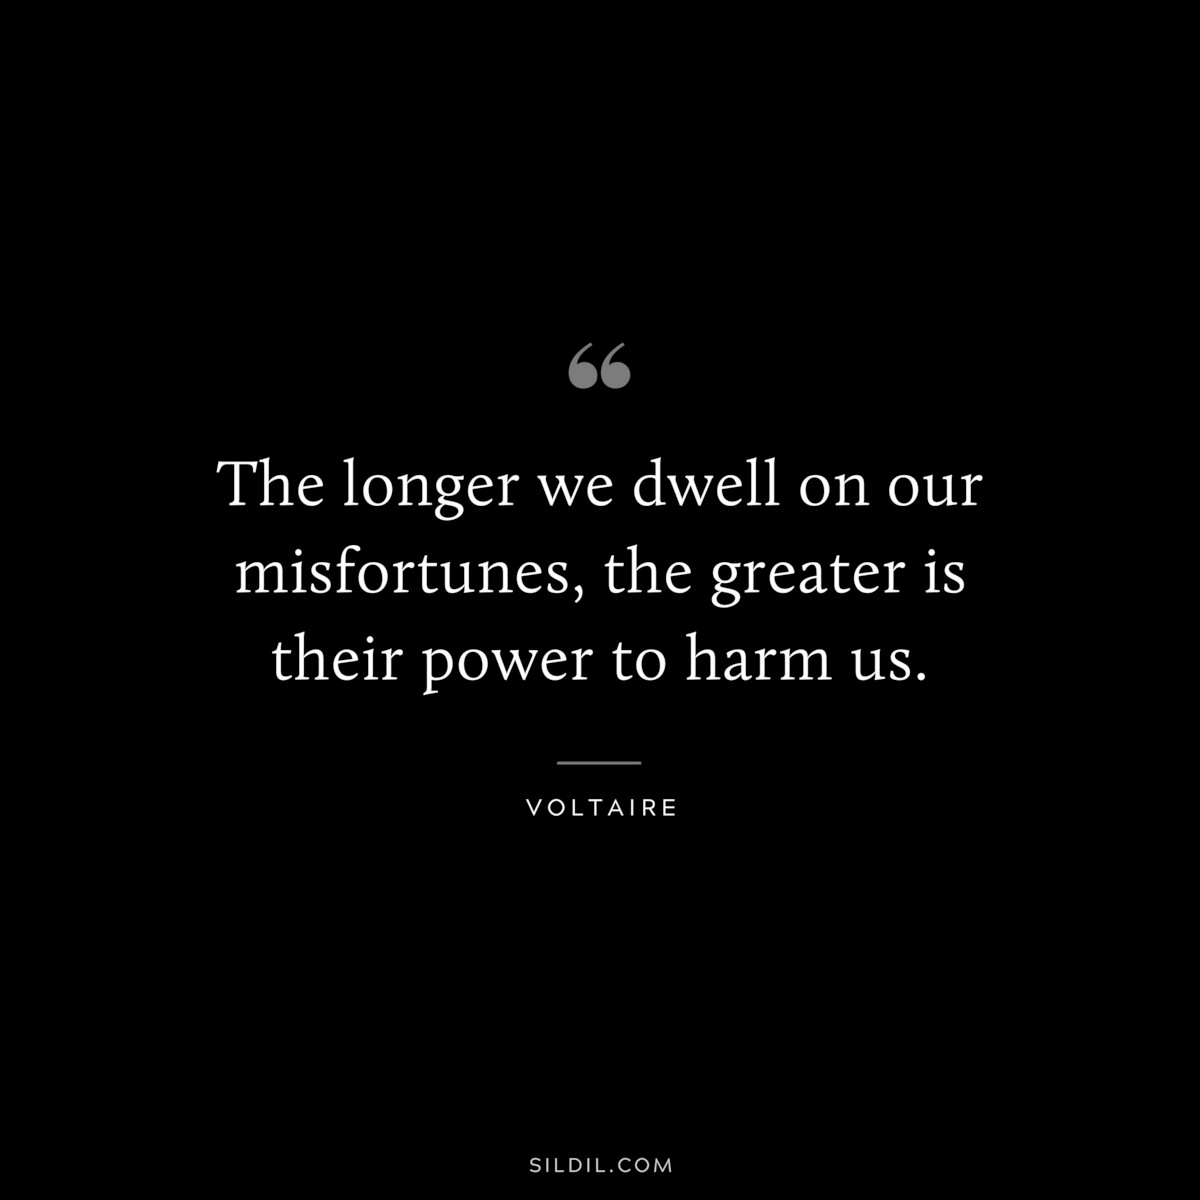 The longer we dwell on our misfortunes, the greater is their power to harm us. ― Voltaire